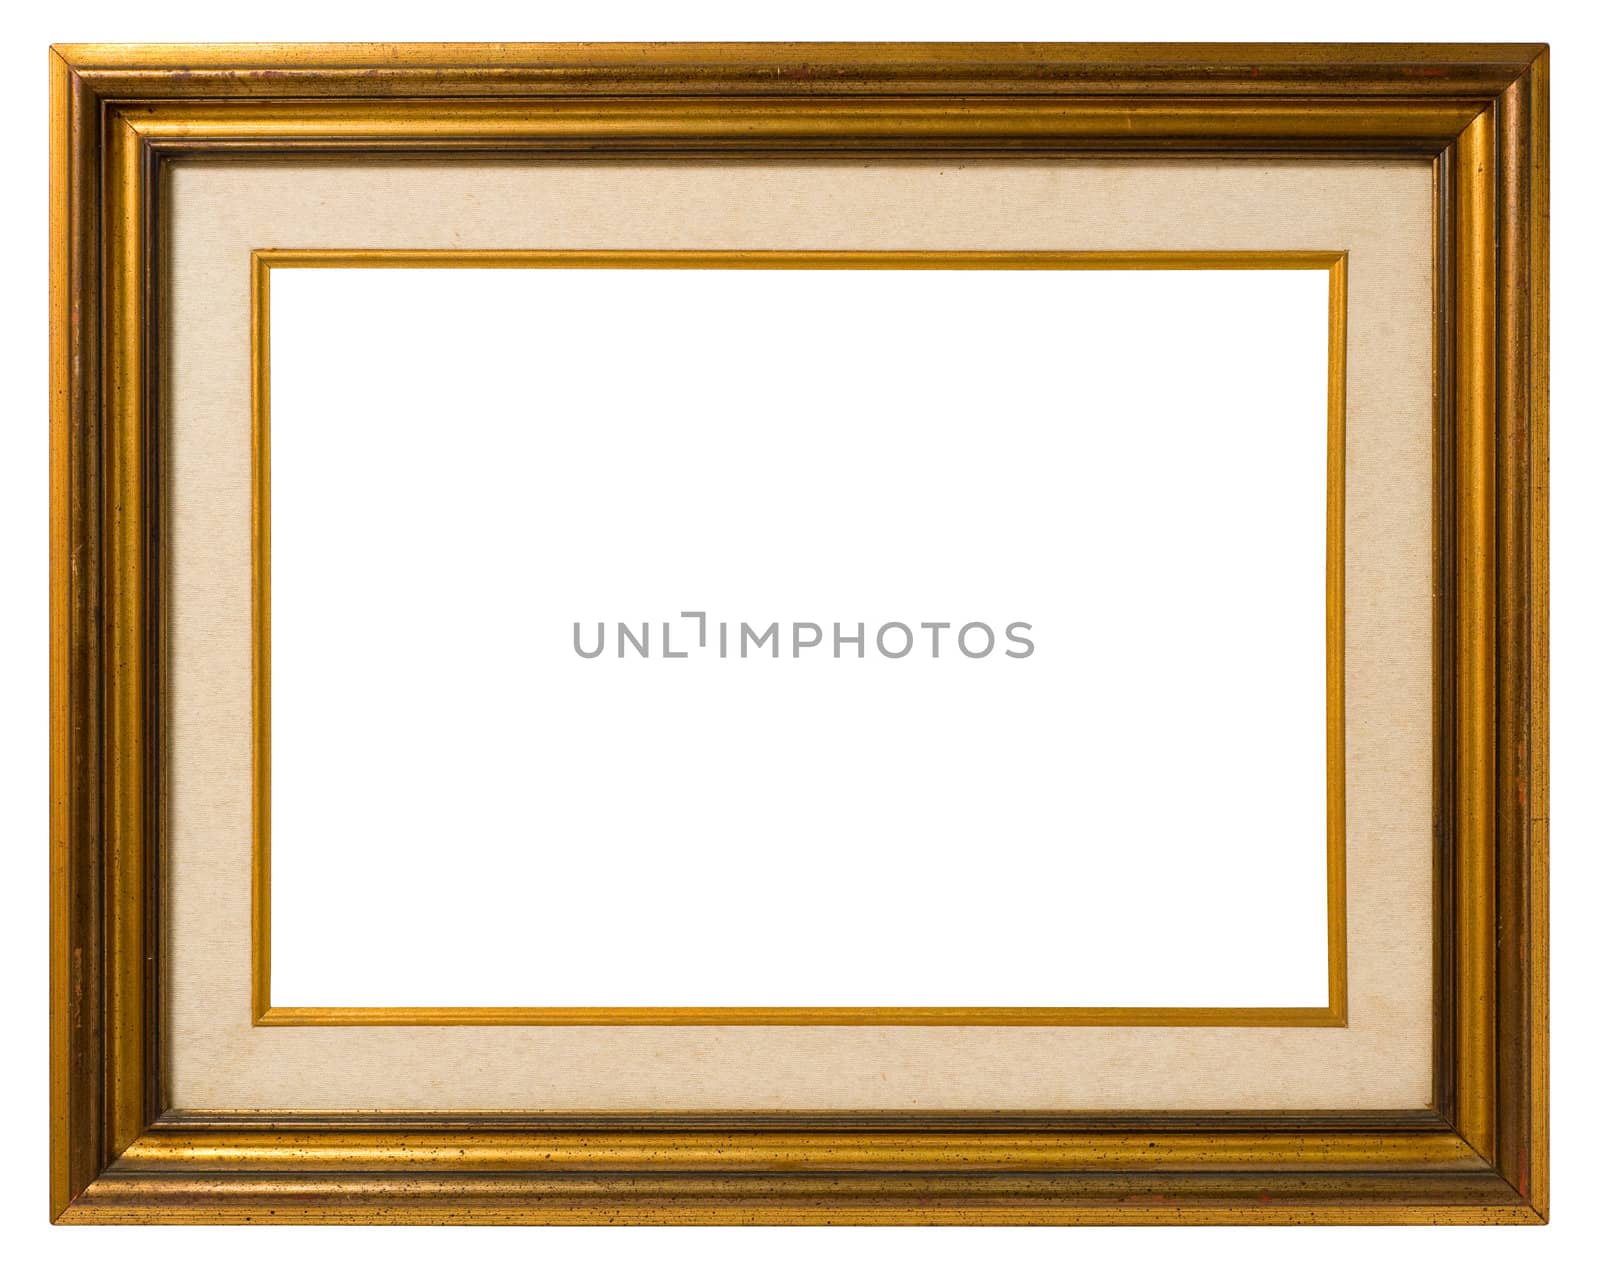 Antique double frame: gilded wood and canvas, italian style,  isolated on white background - include clipping path.